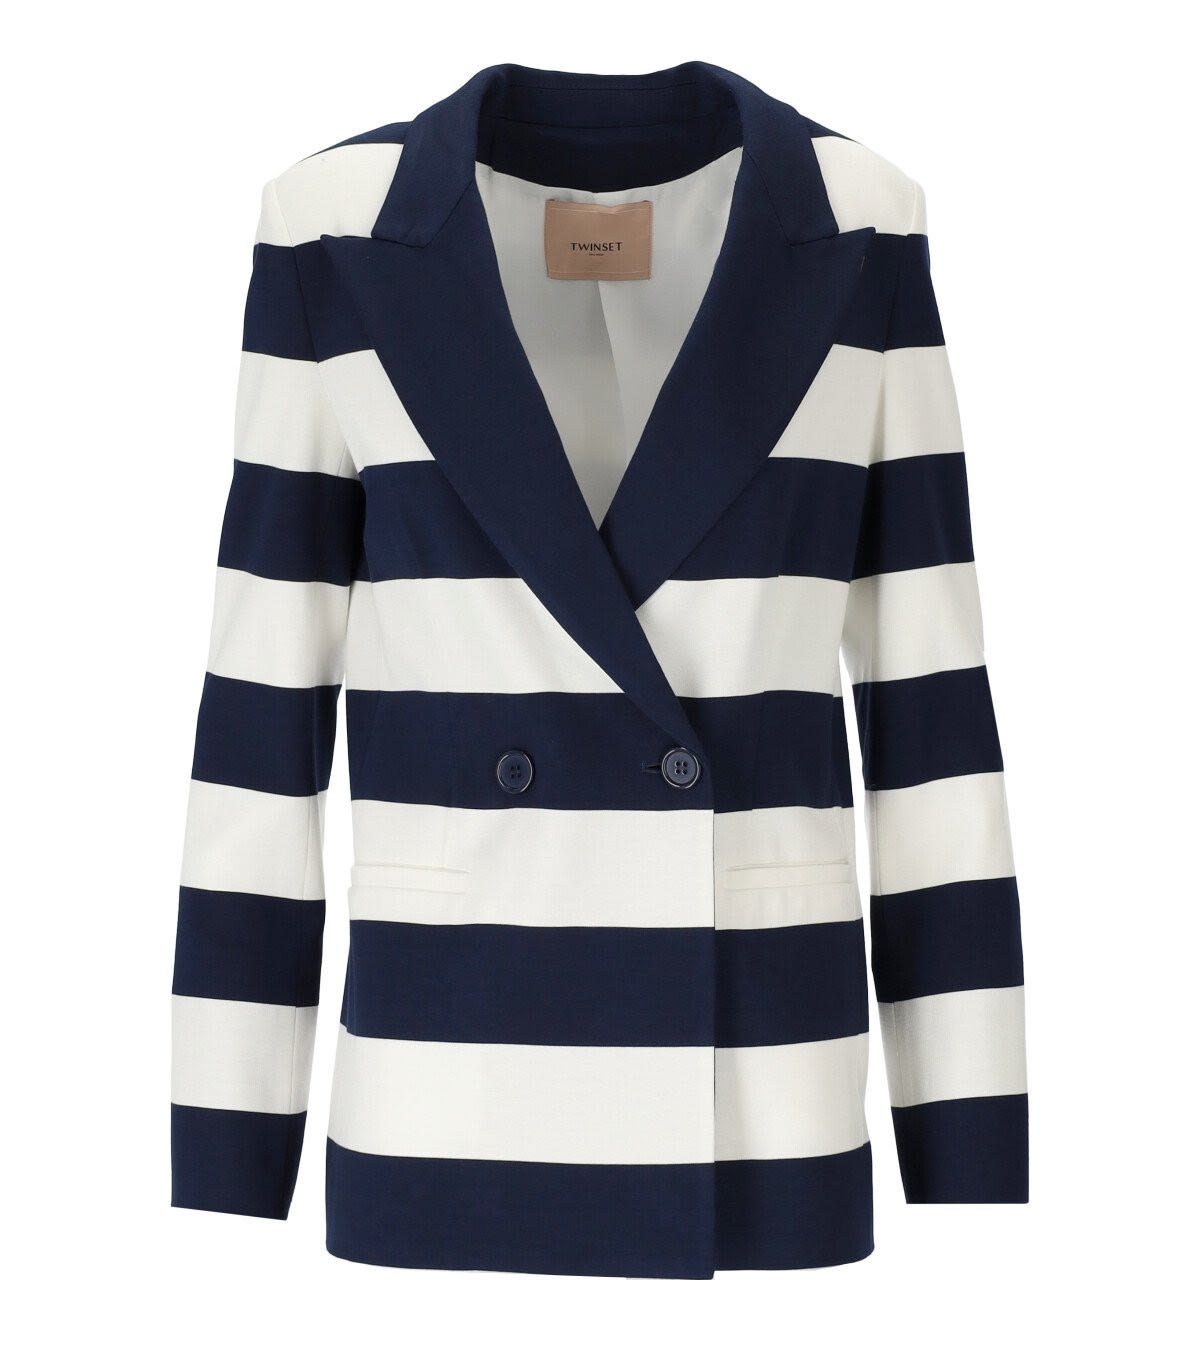 TWINSET TWINSET WHITE AND BLUE STRIPED DOUBLE-BREASTED BLAZER